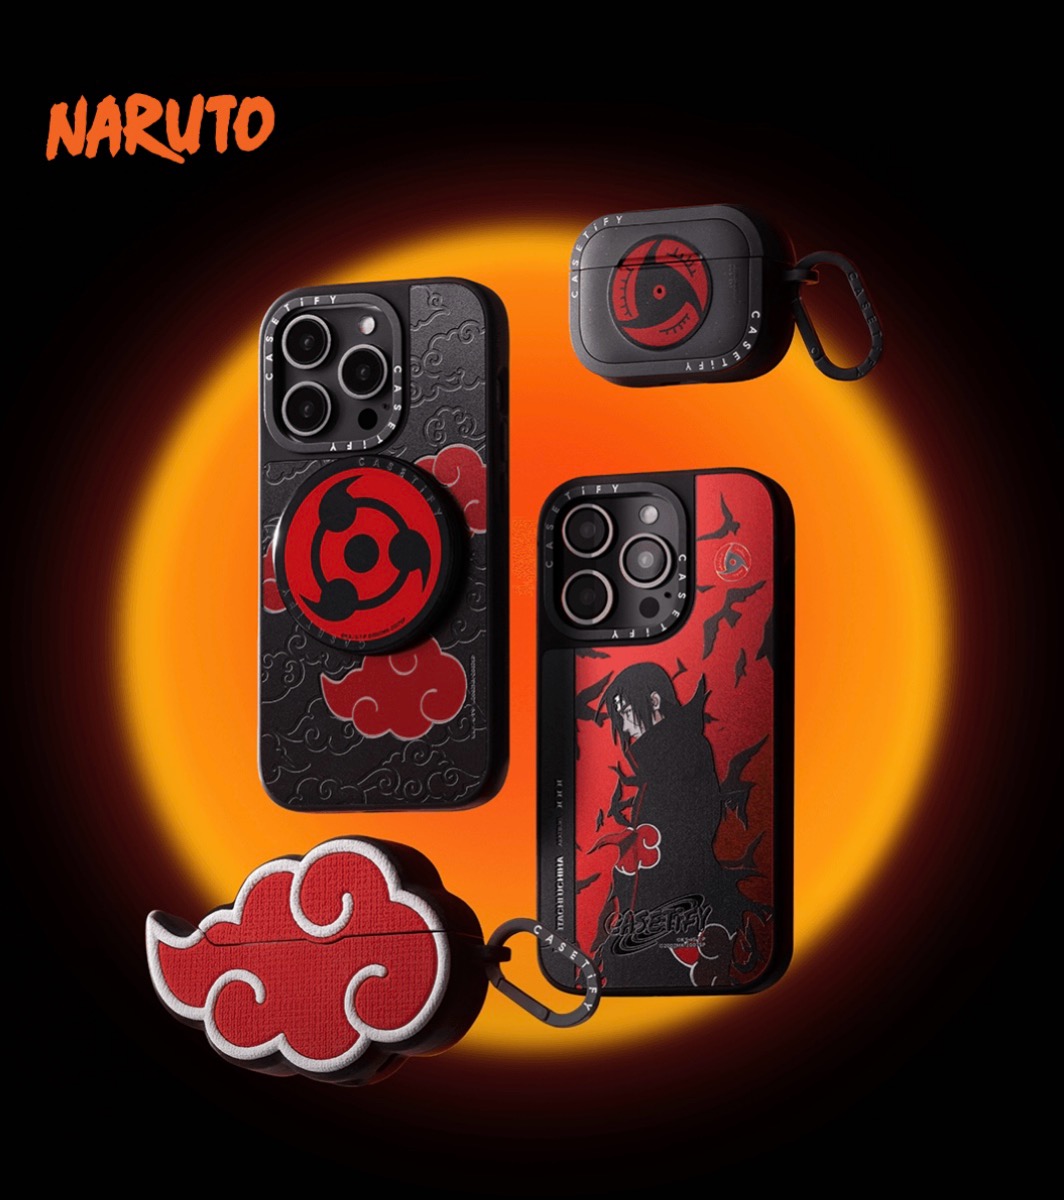 NARUTO × CASETiFY コラボコレクションの新作AirPods Proケースが国内1 